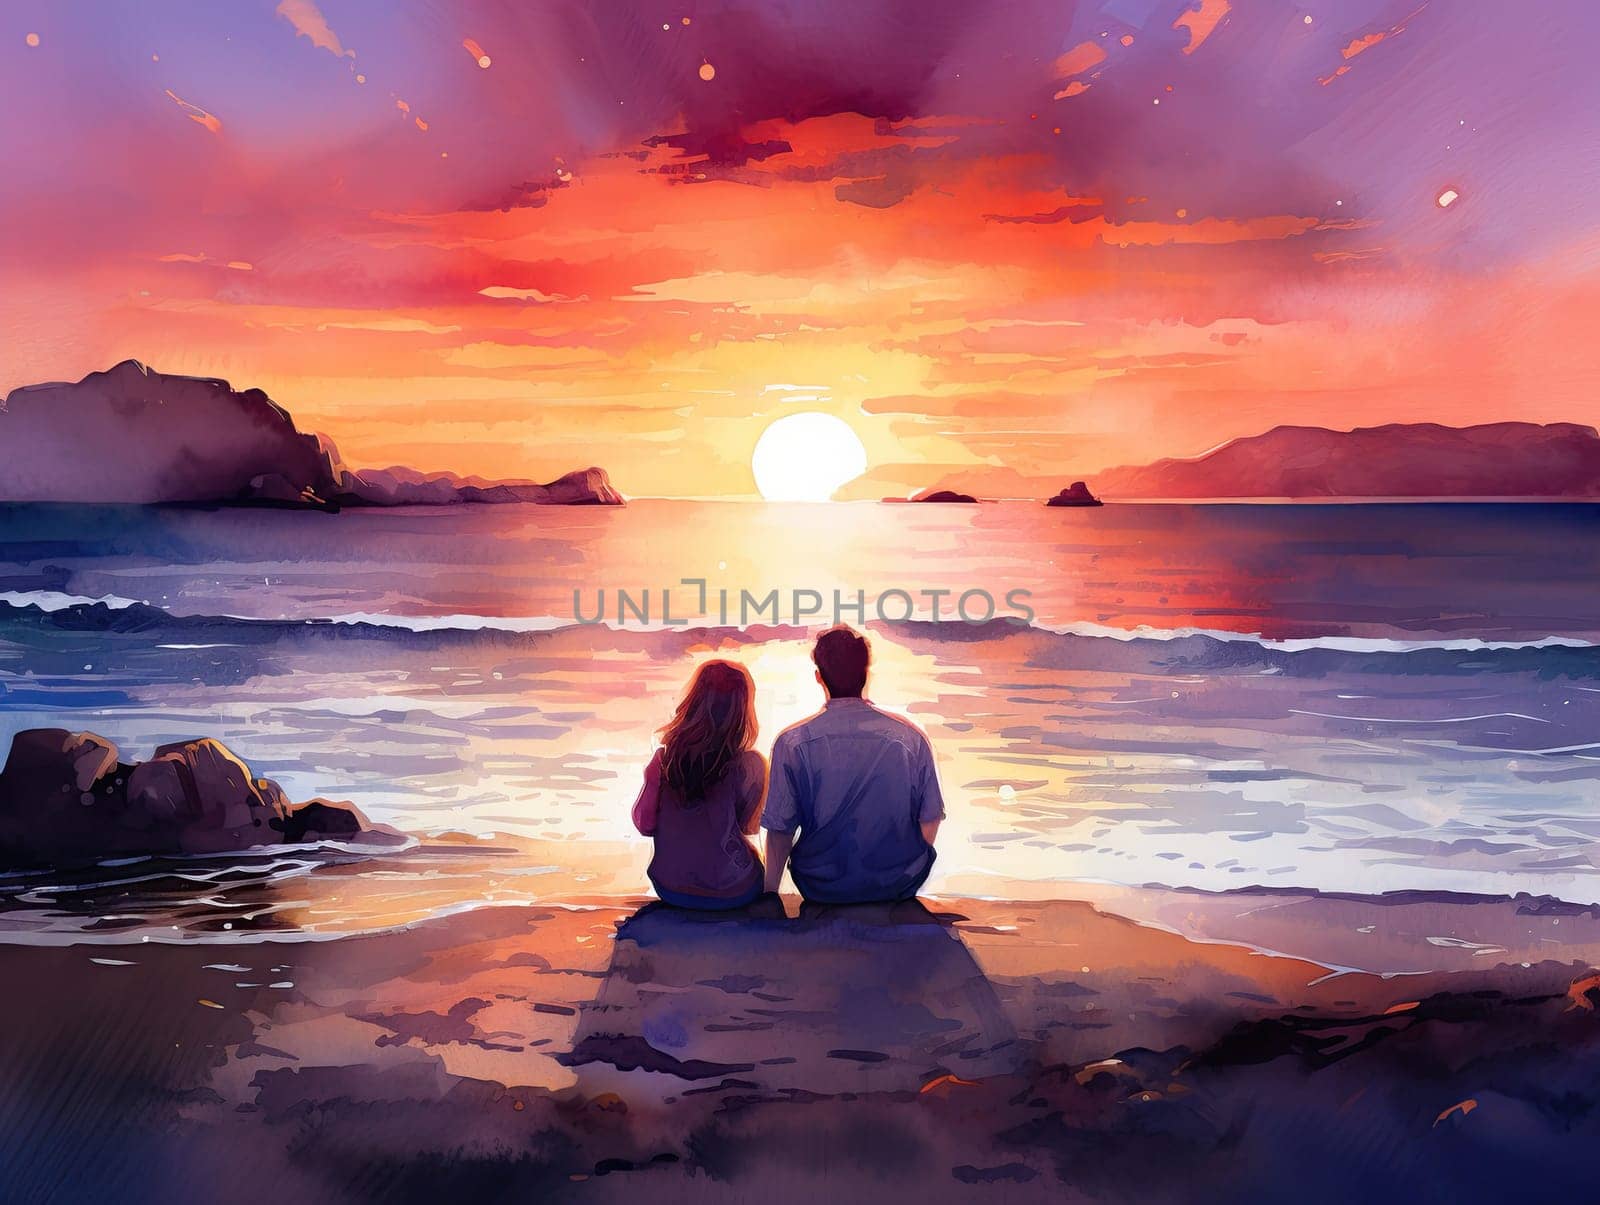 Water color painting romantic scene of young couple sitting on a beach at sunset by papatonic